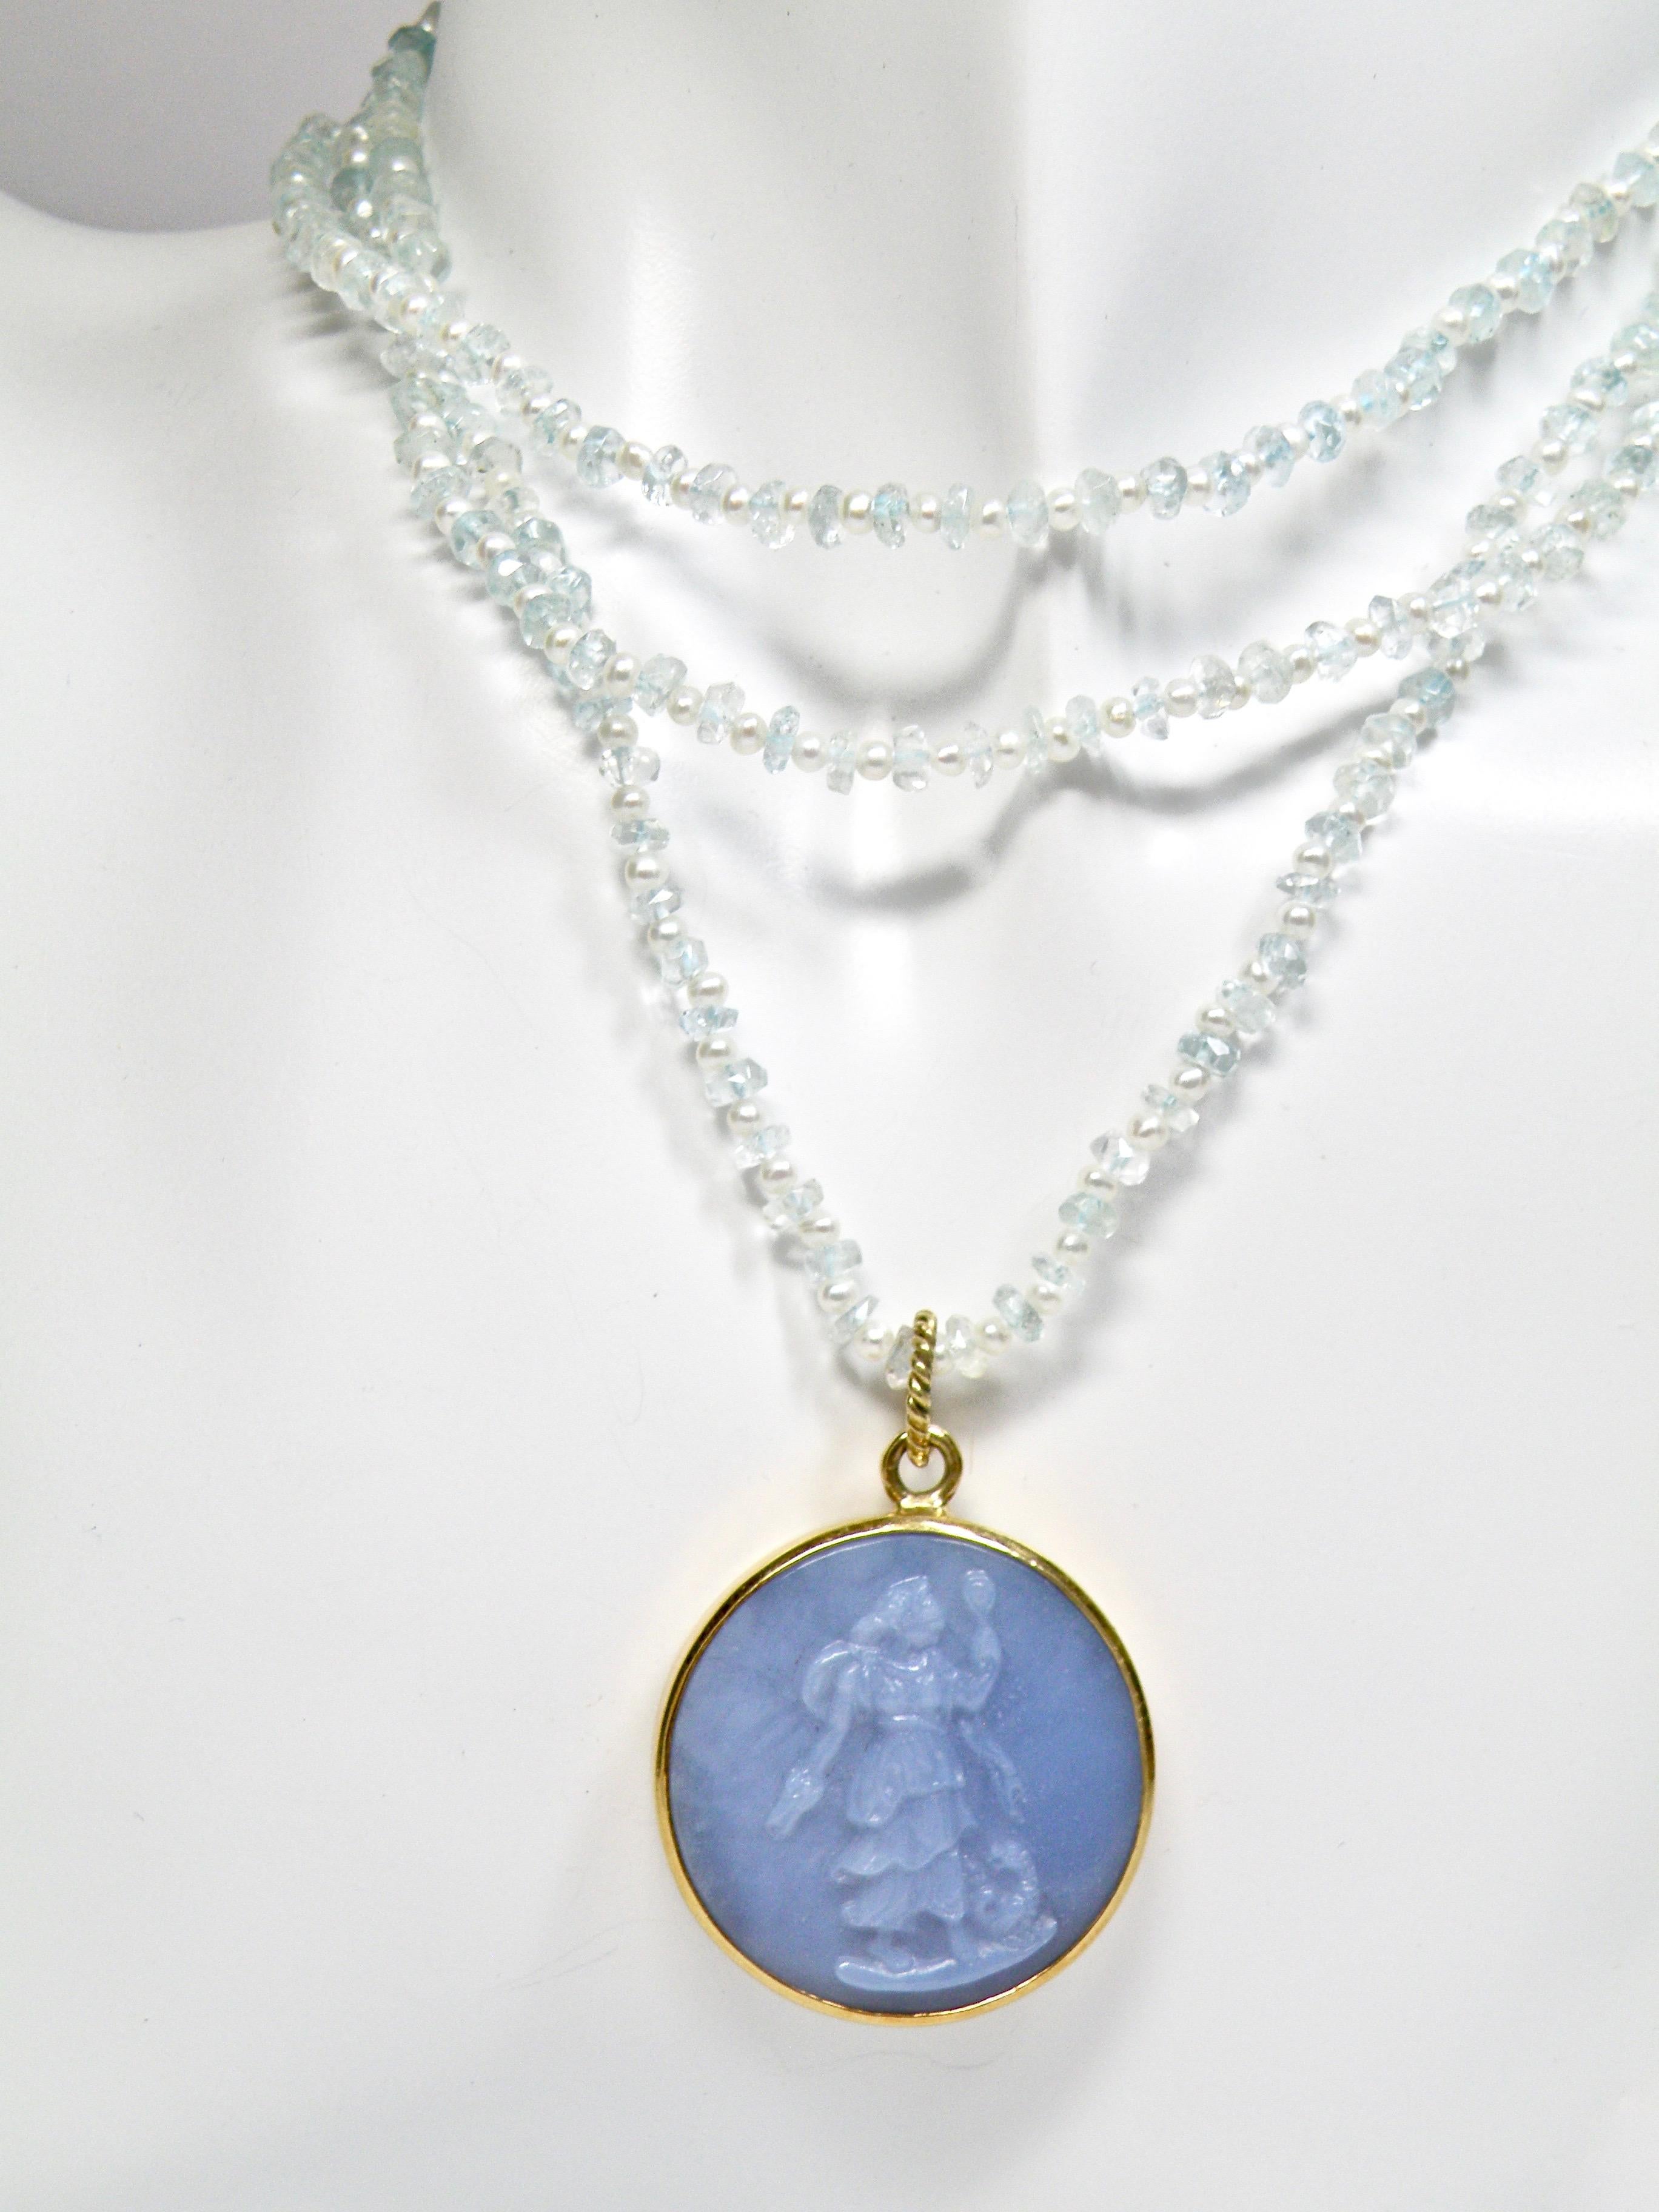 Hand carved chalcedony replica medal of the female figure of Prudence, who is historically associated with wisdom and virtue. Carved by Idar Oberstein, master carver. Set in 18karat gold frame with twist wire loop.